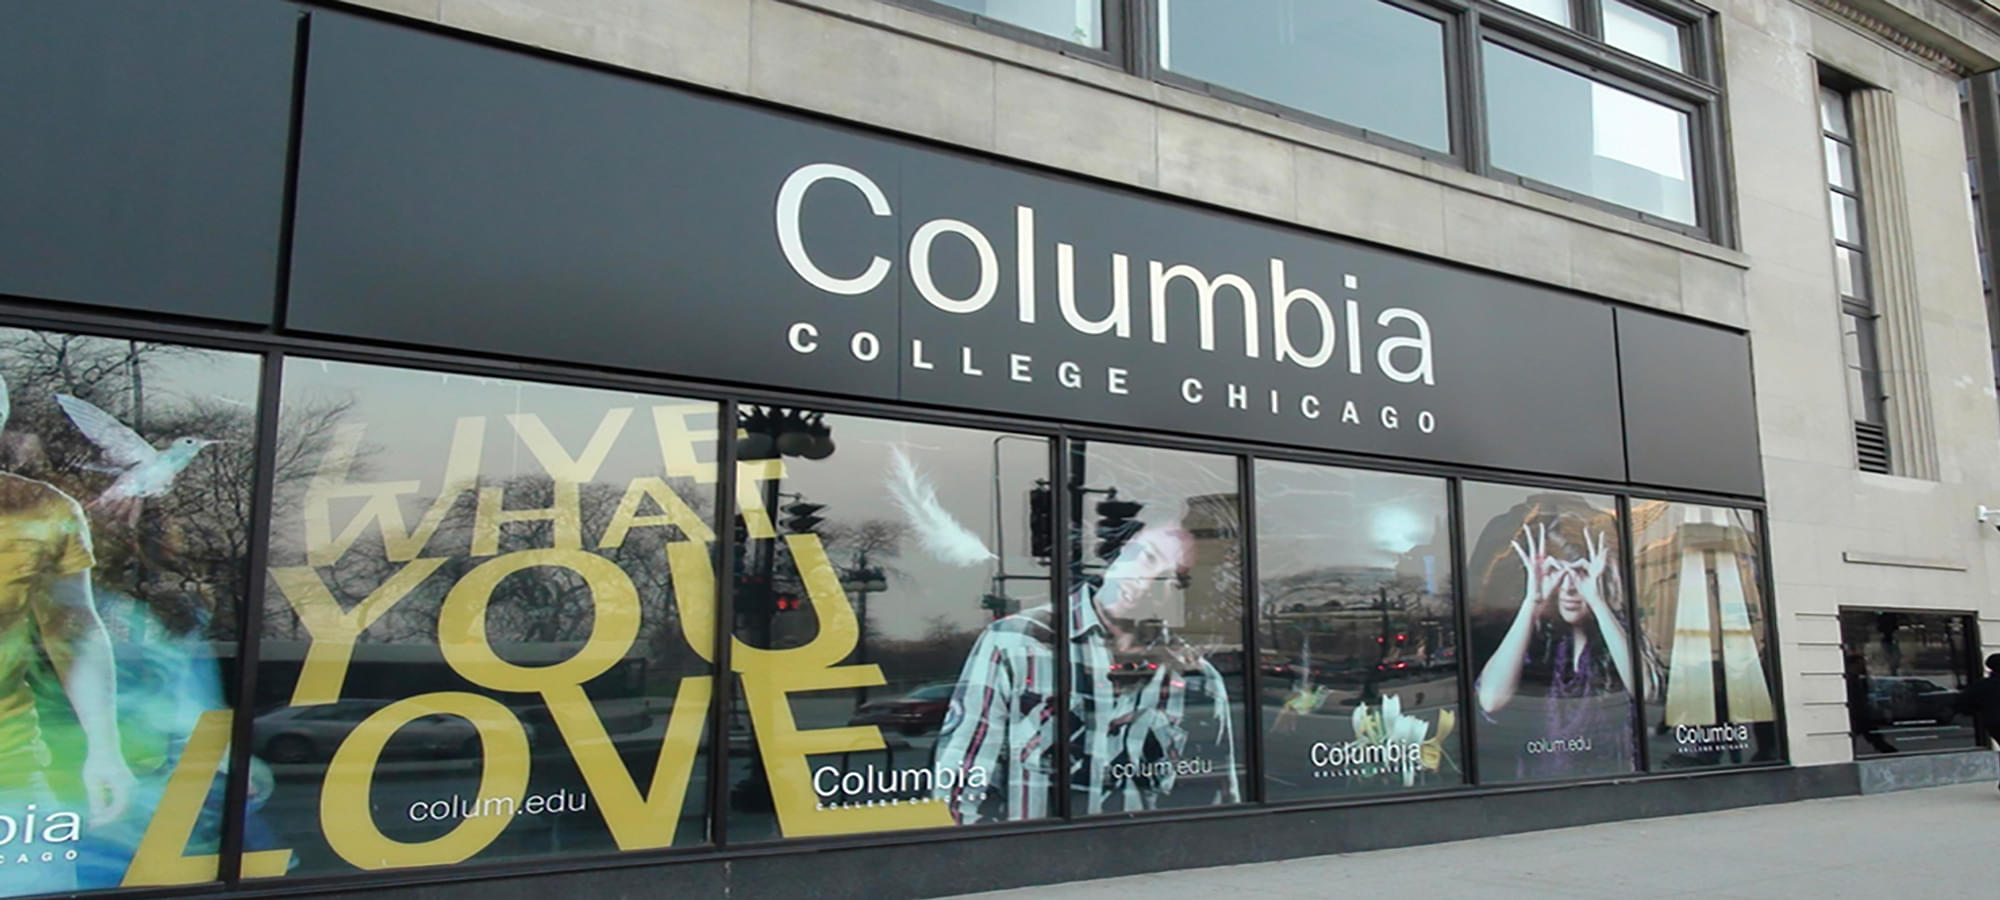 Columbia College Chicago, Chicago Courses, Fees, Ranking, & Admission